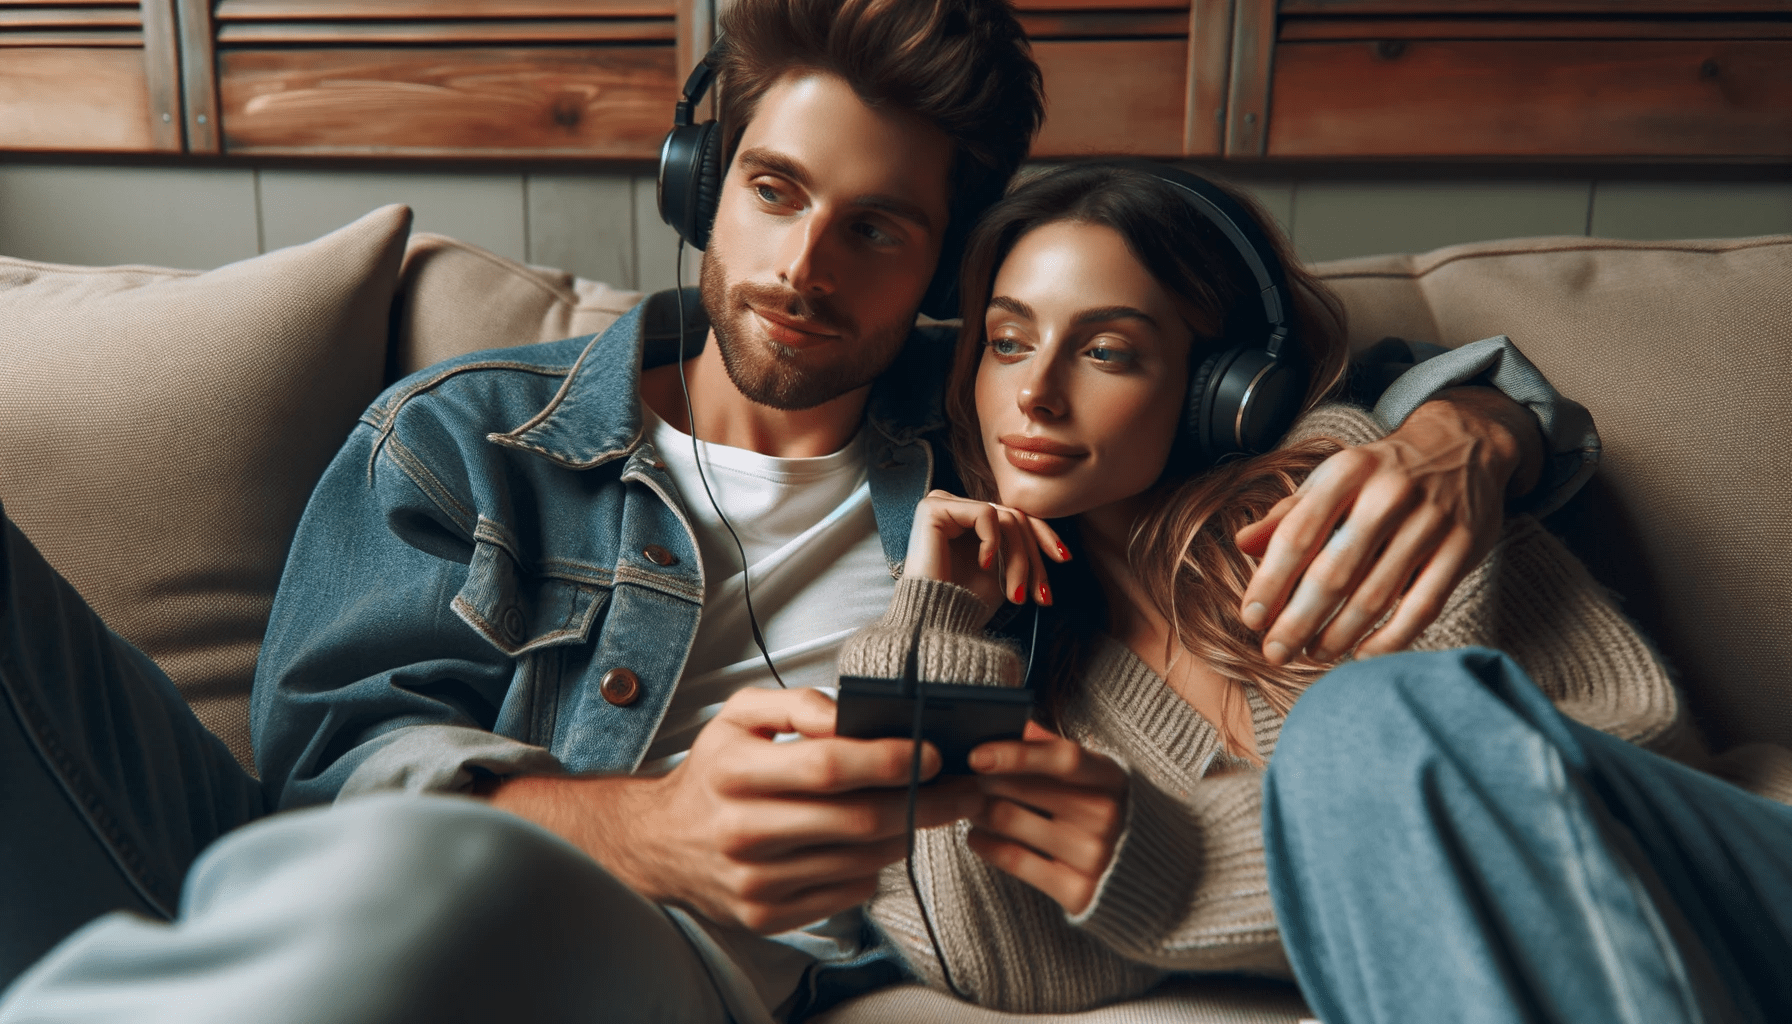 a cozy living room. A couple of European descent lounges on the couch with headphones on sharing a music player. Their expressions show they